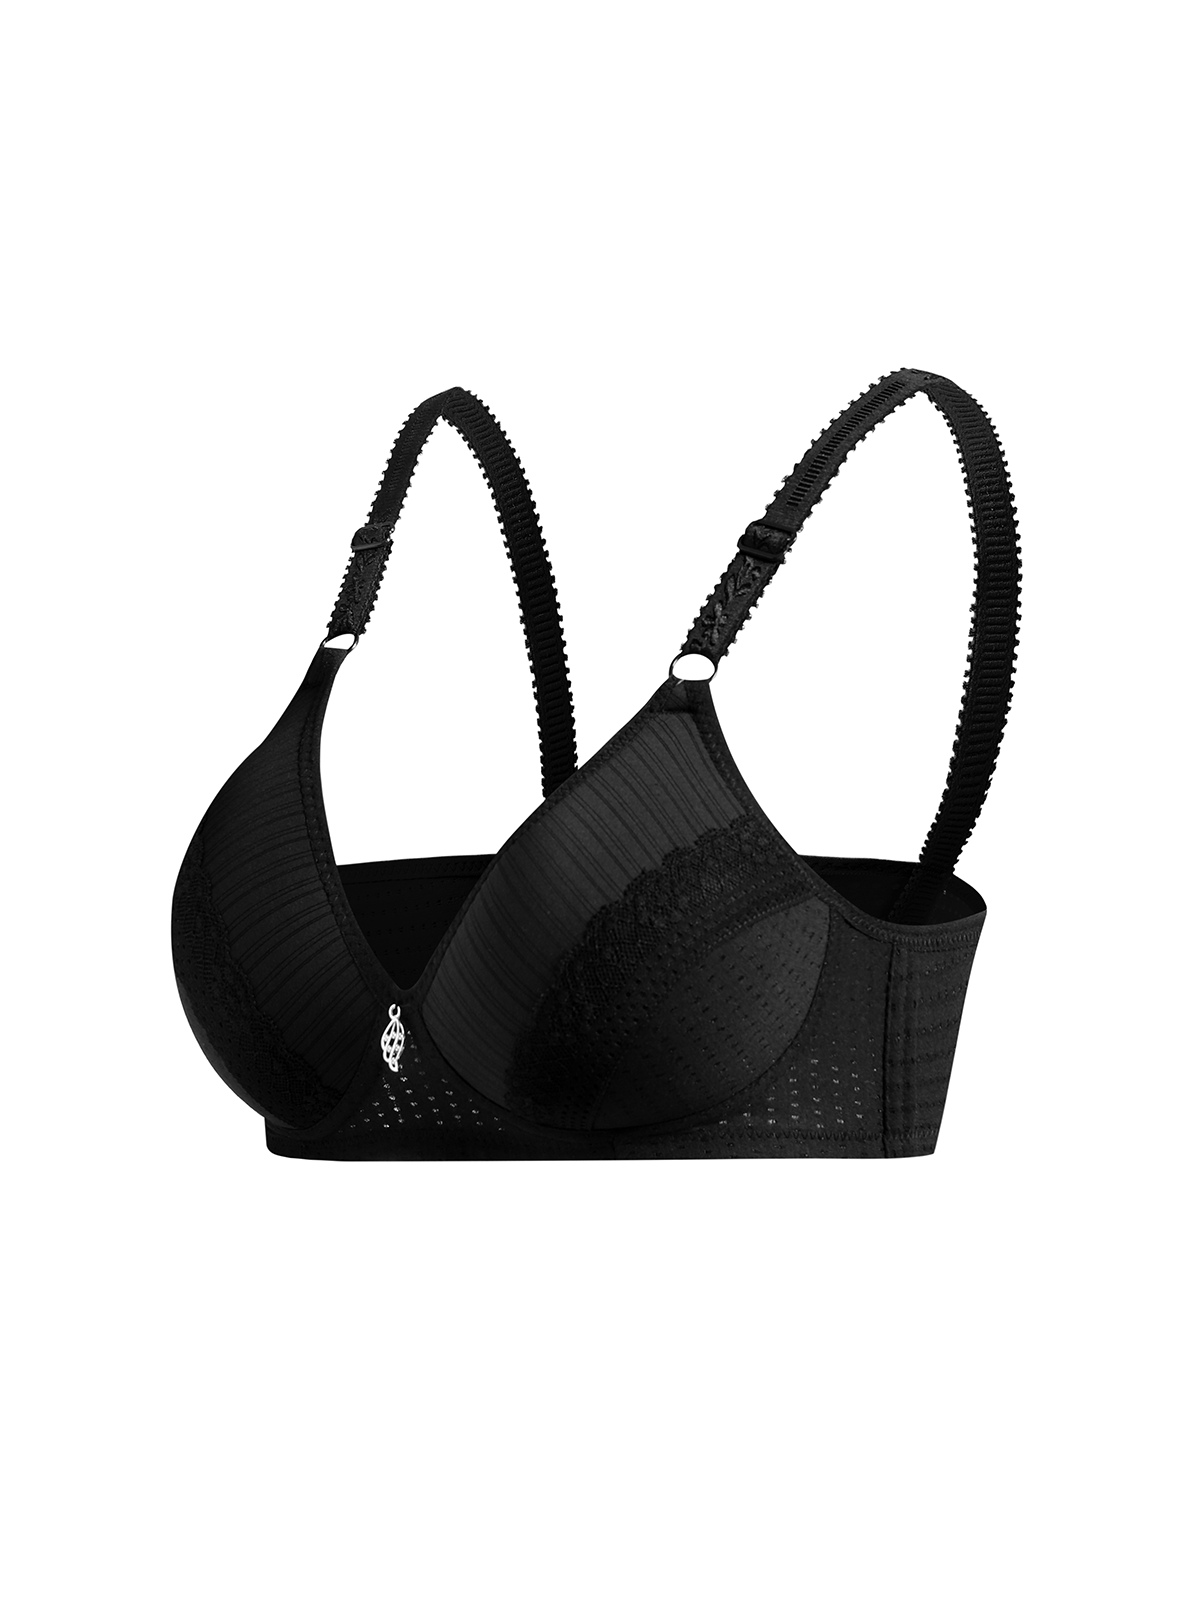 Comfortable Push Up No Wire Bras